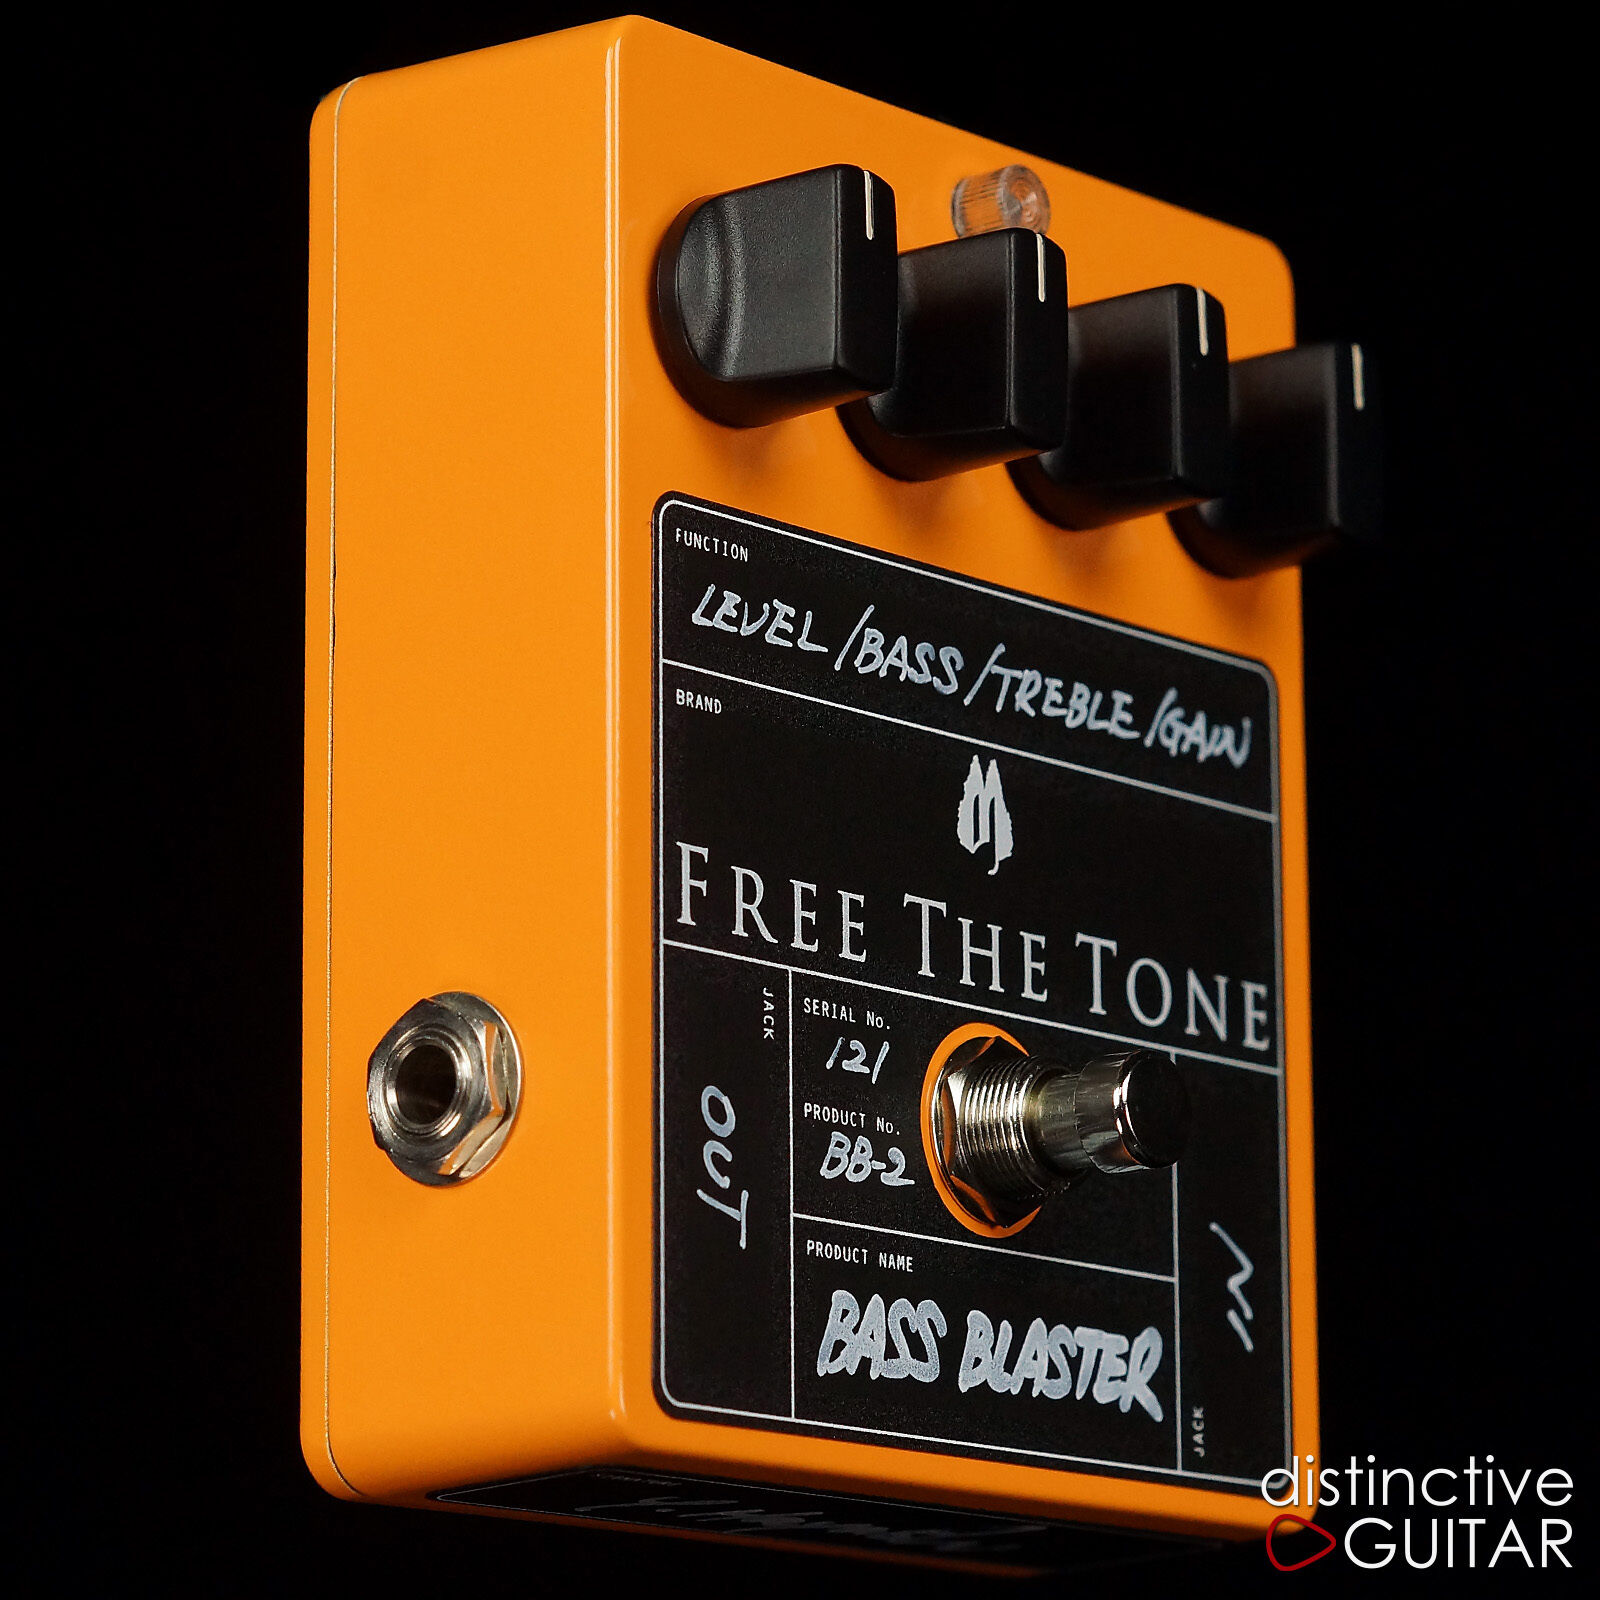 NEW FREE THE TONE BB2 BASS BLASTER CUSTOM SERIES TUBE OVERDRIVE EFFECTS  PEDAL